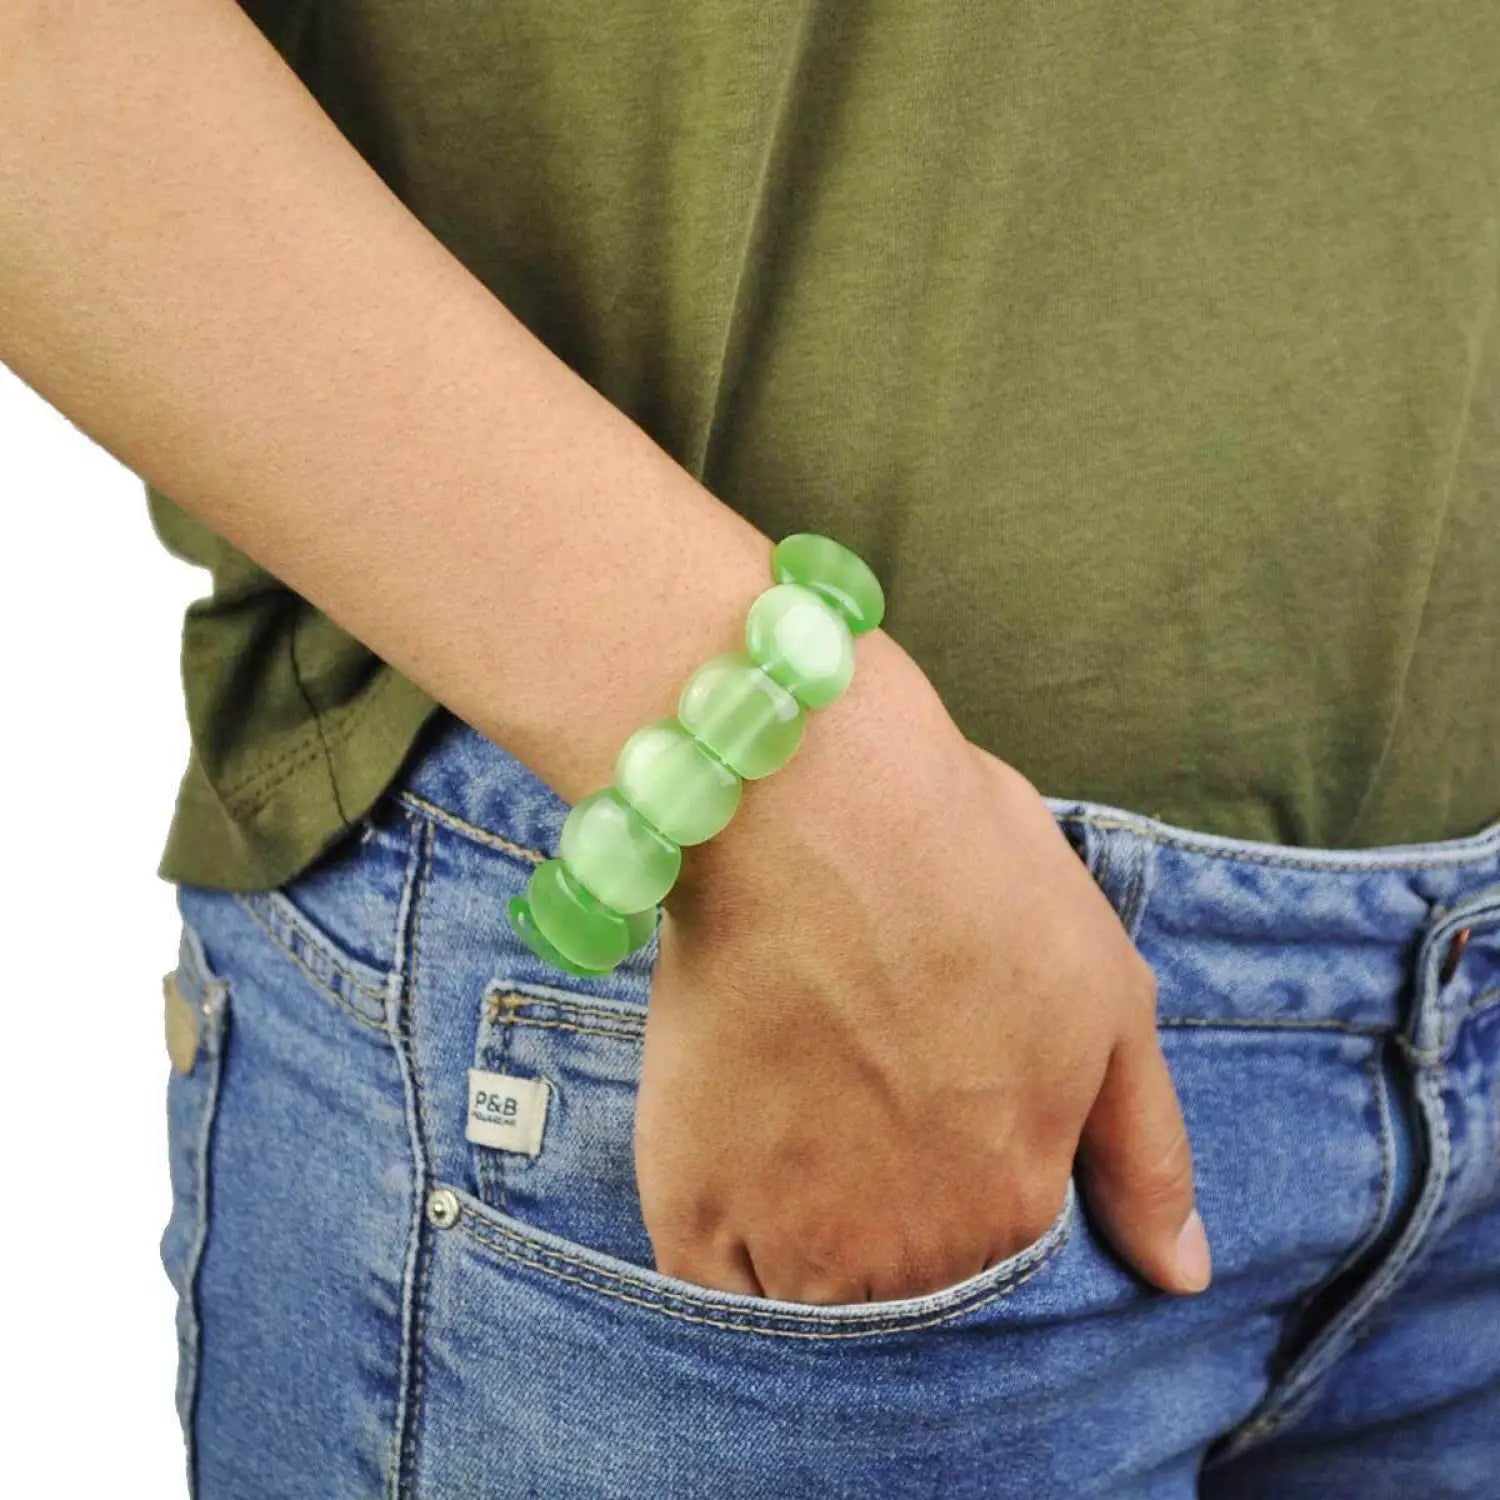 Green pastel plastic bead bracelet from Tri-set - perfect accessory for any occasion.